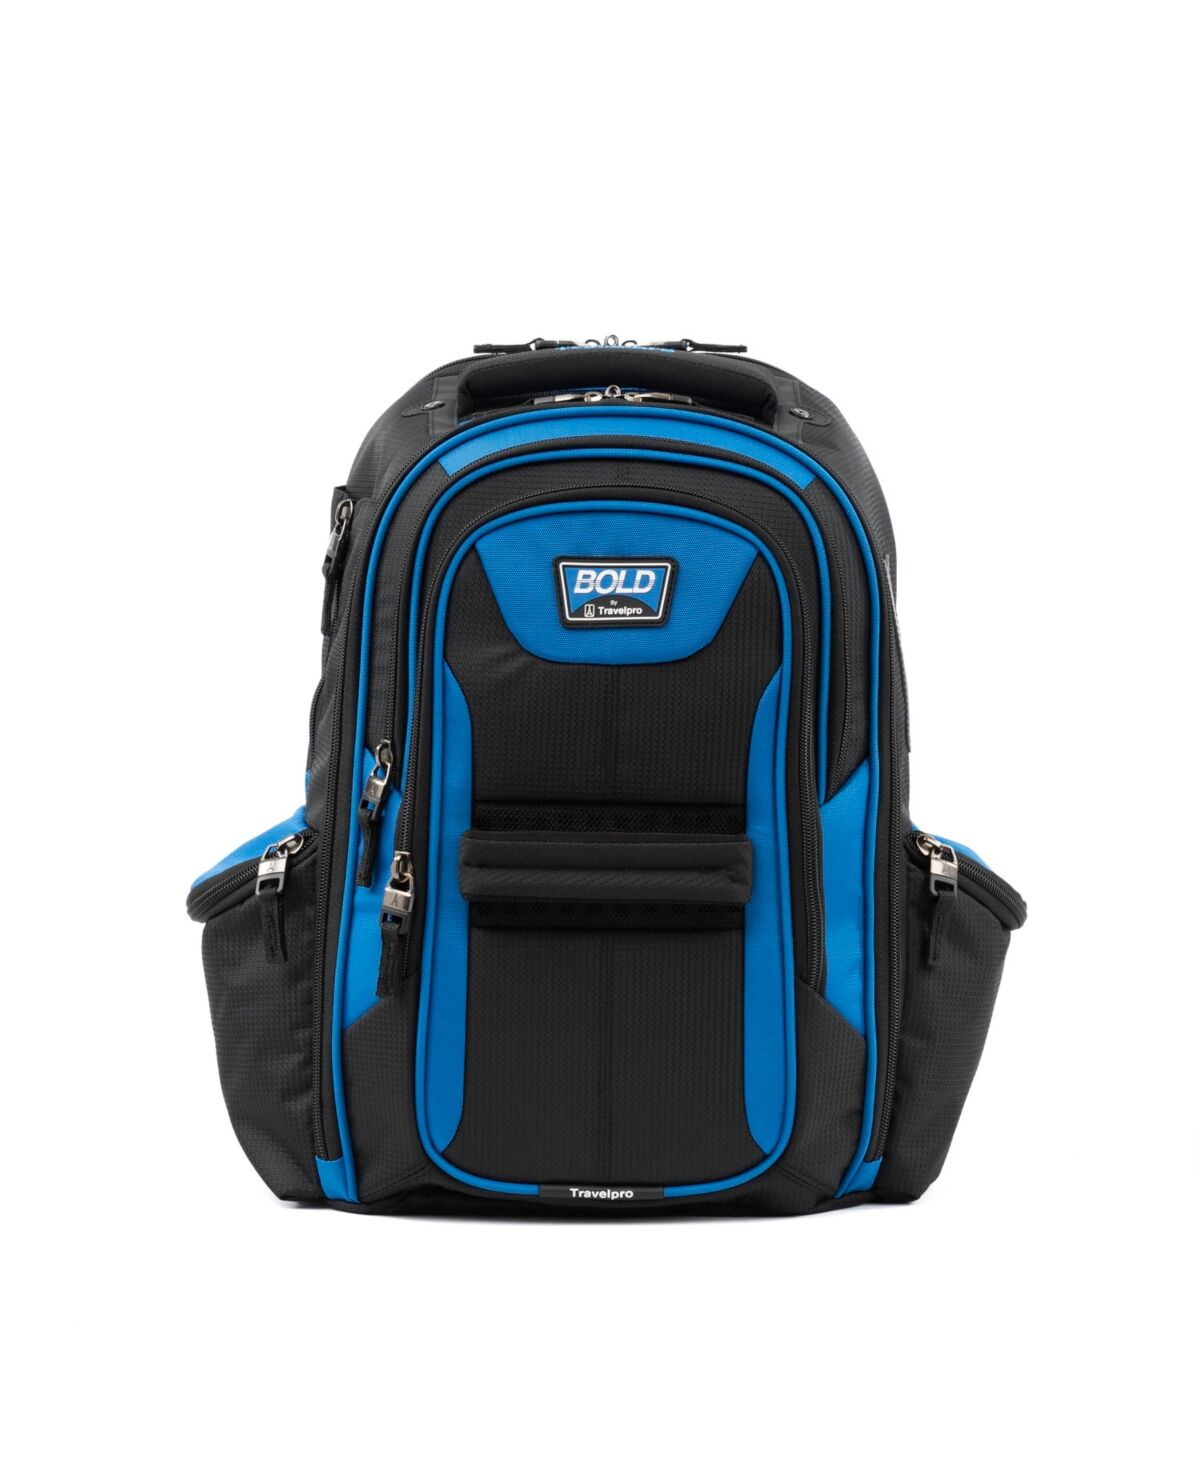 Travelpro Bold Computer Backpack - Blue